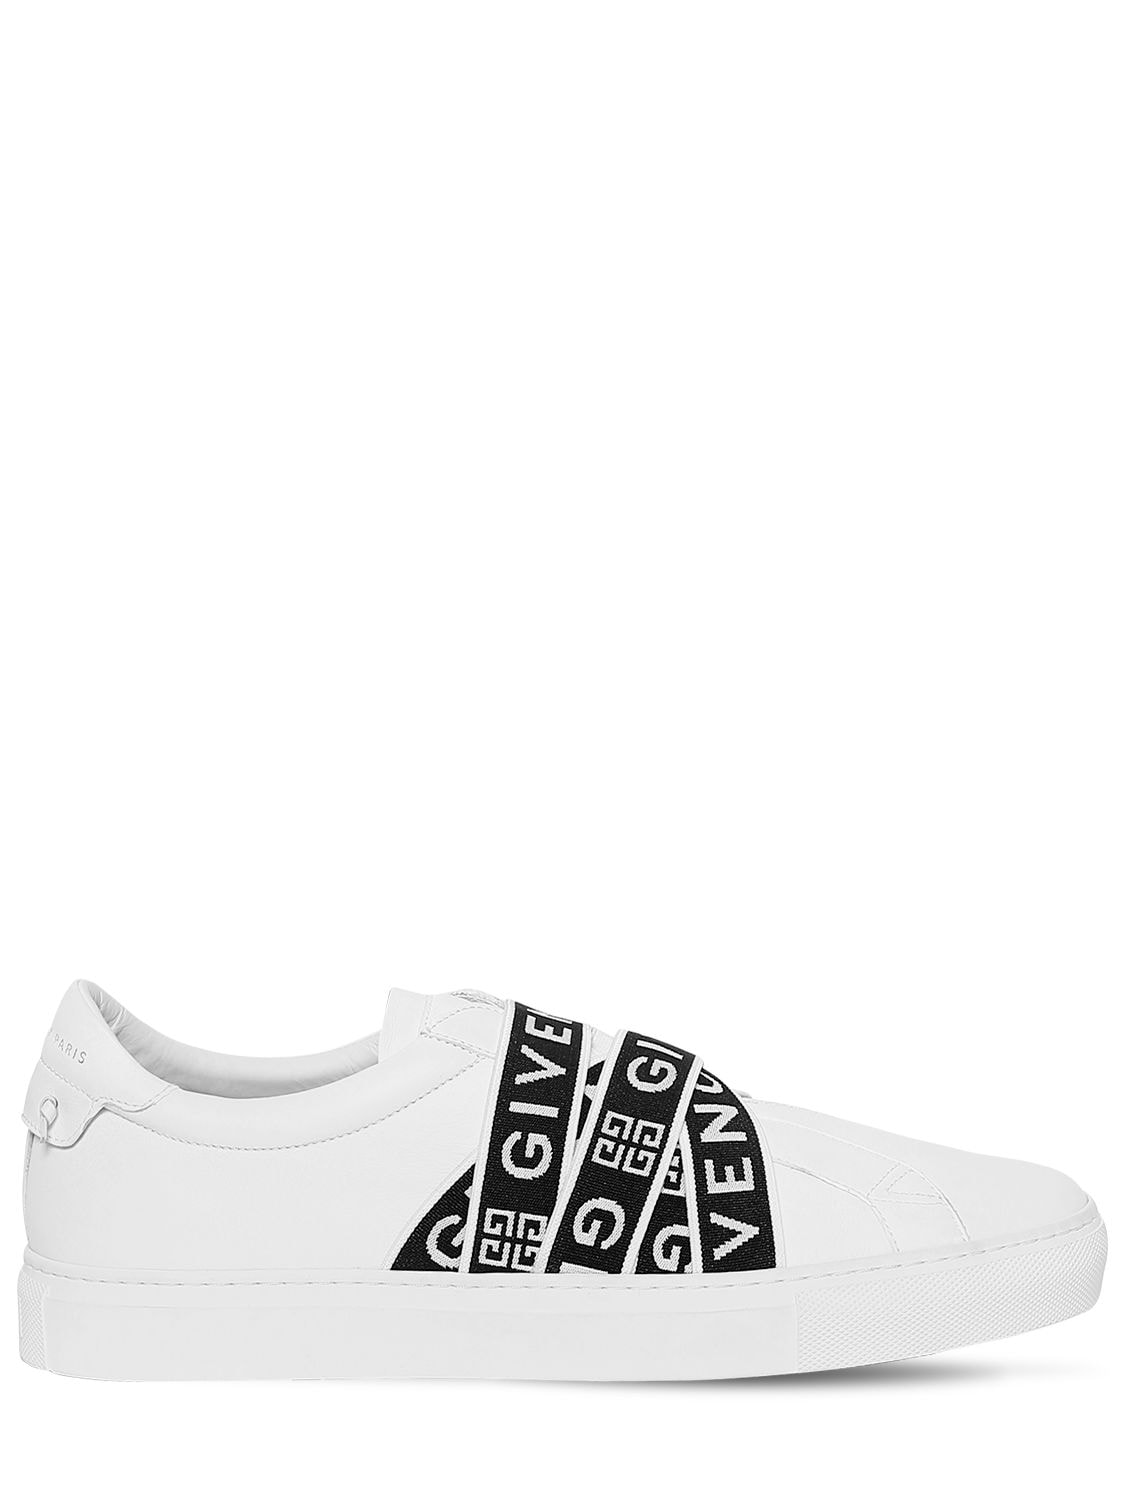 GIVENCHY URBAN STREET LEATHER SLIP-ON trainers,69ILE1006-MTE20